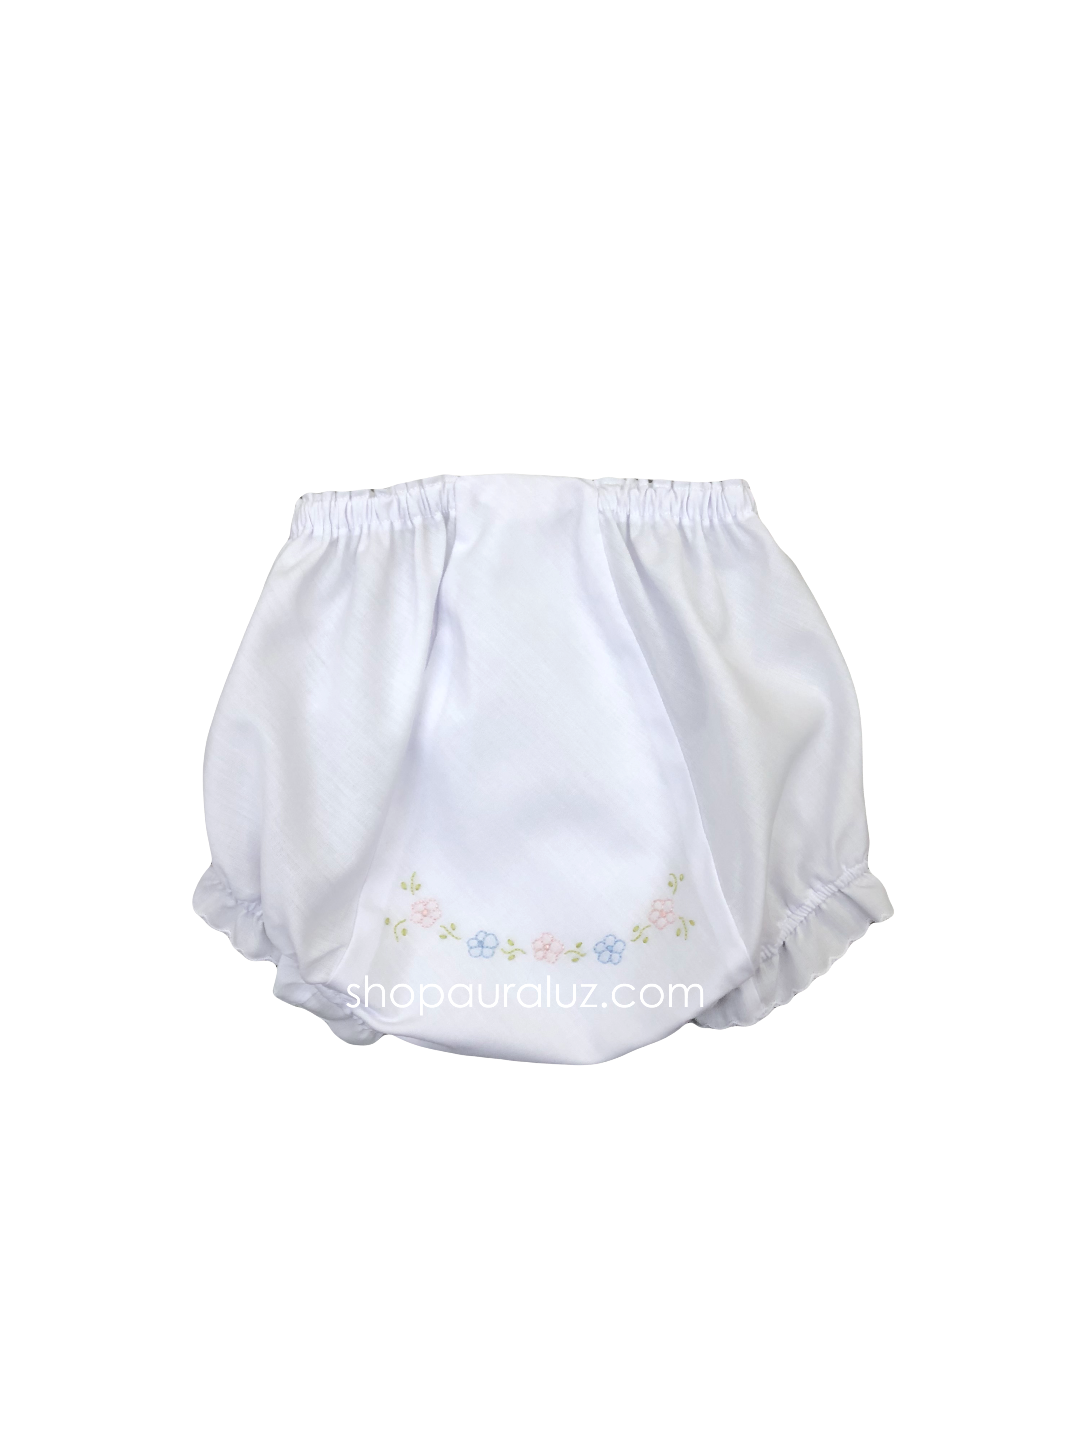 Auraluz Panty...White with scallops and embroidered flowers